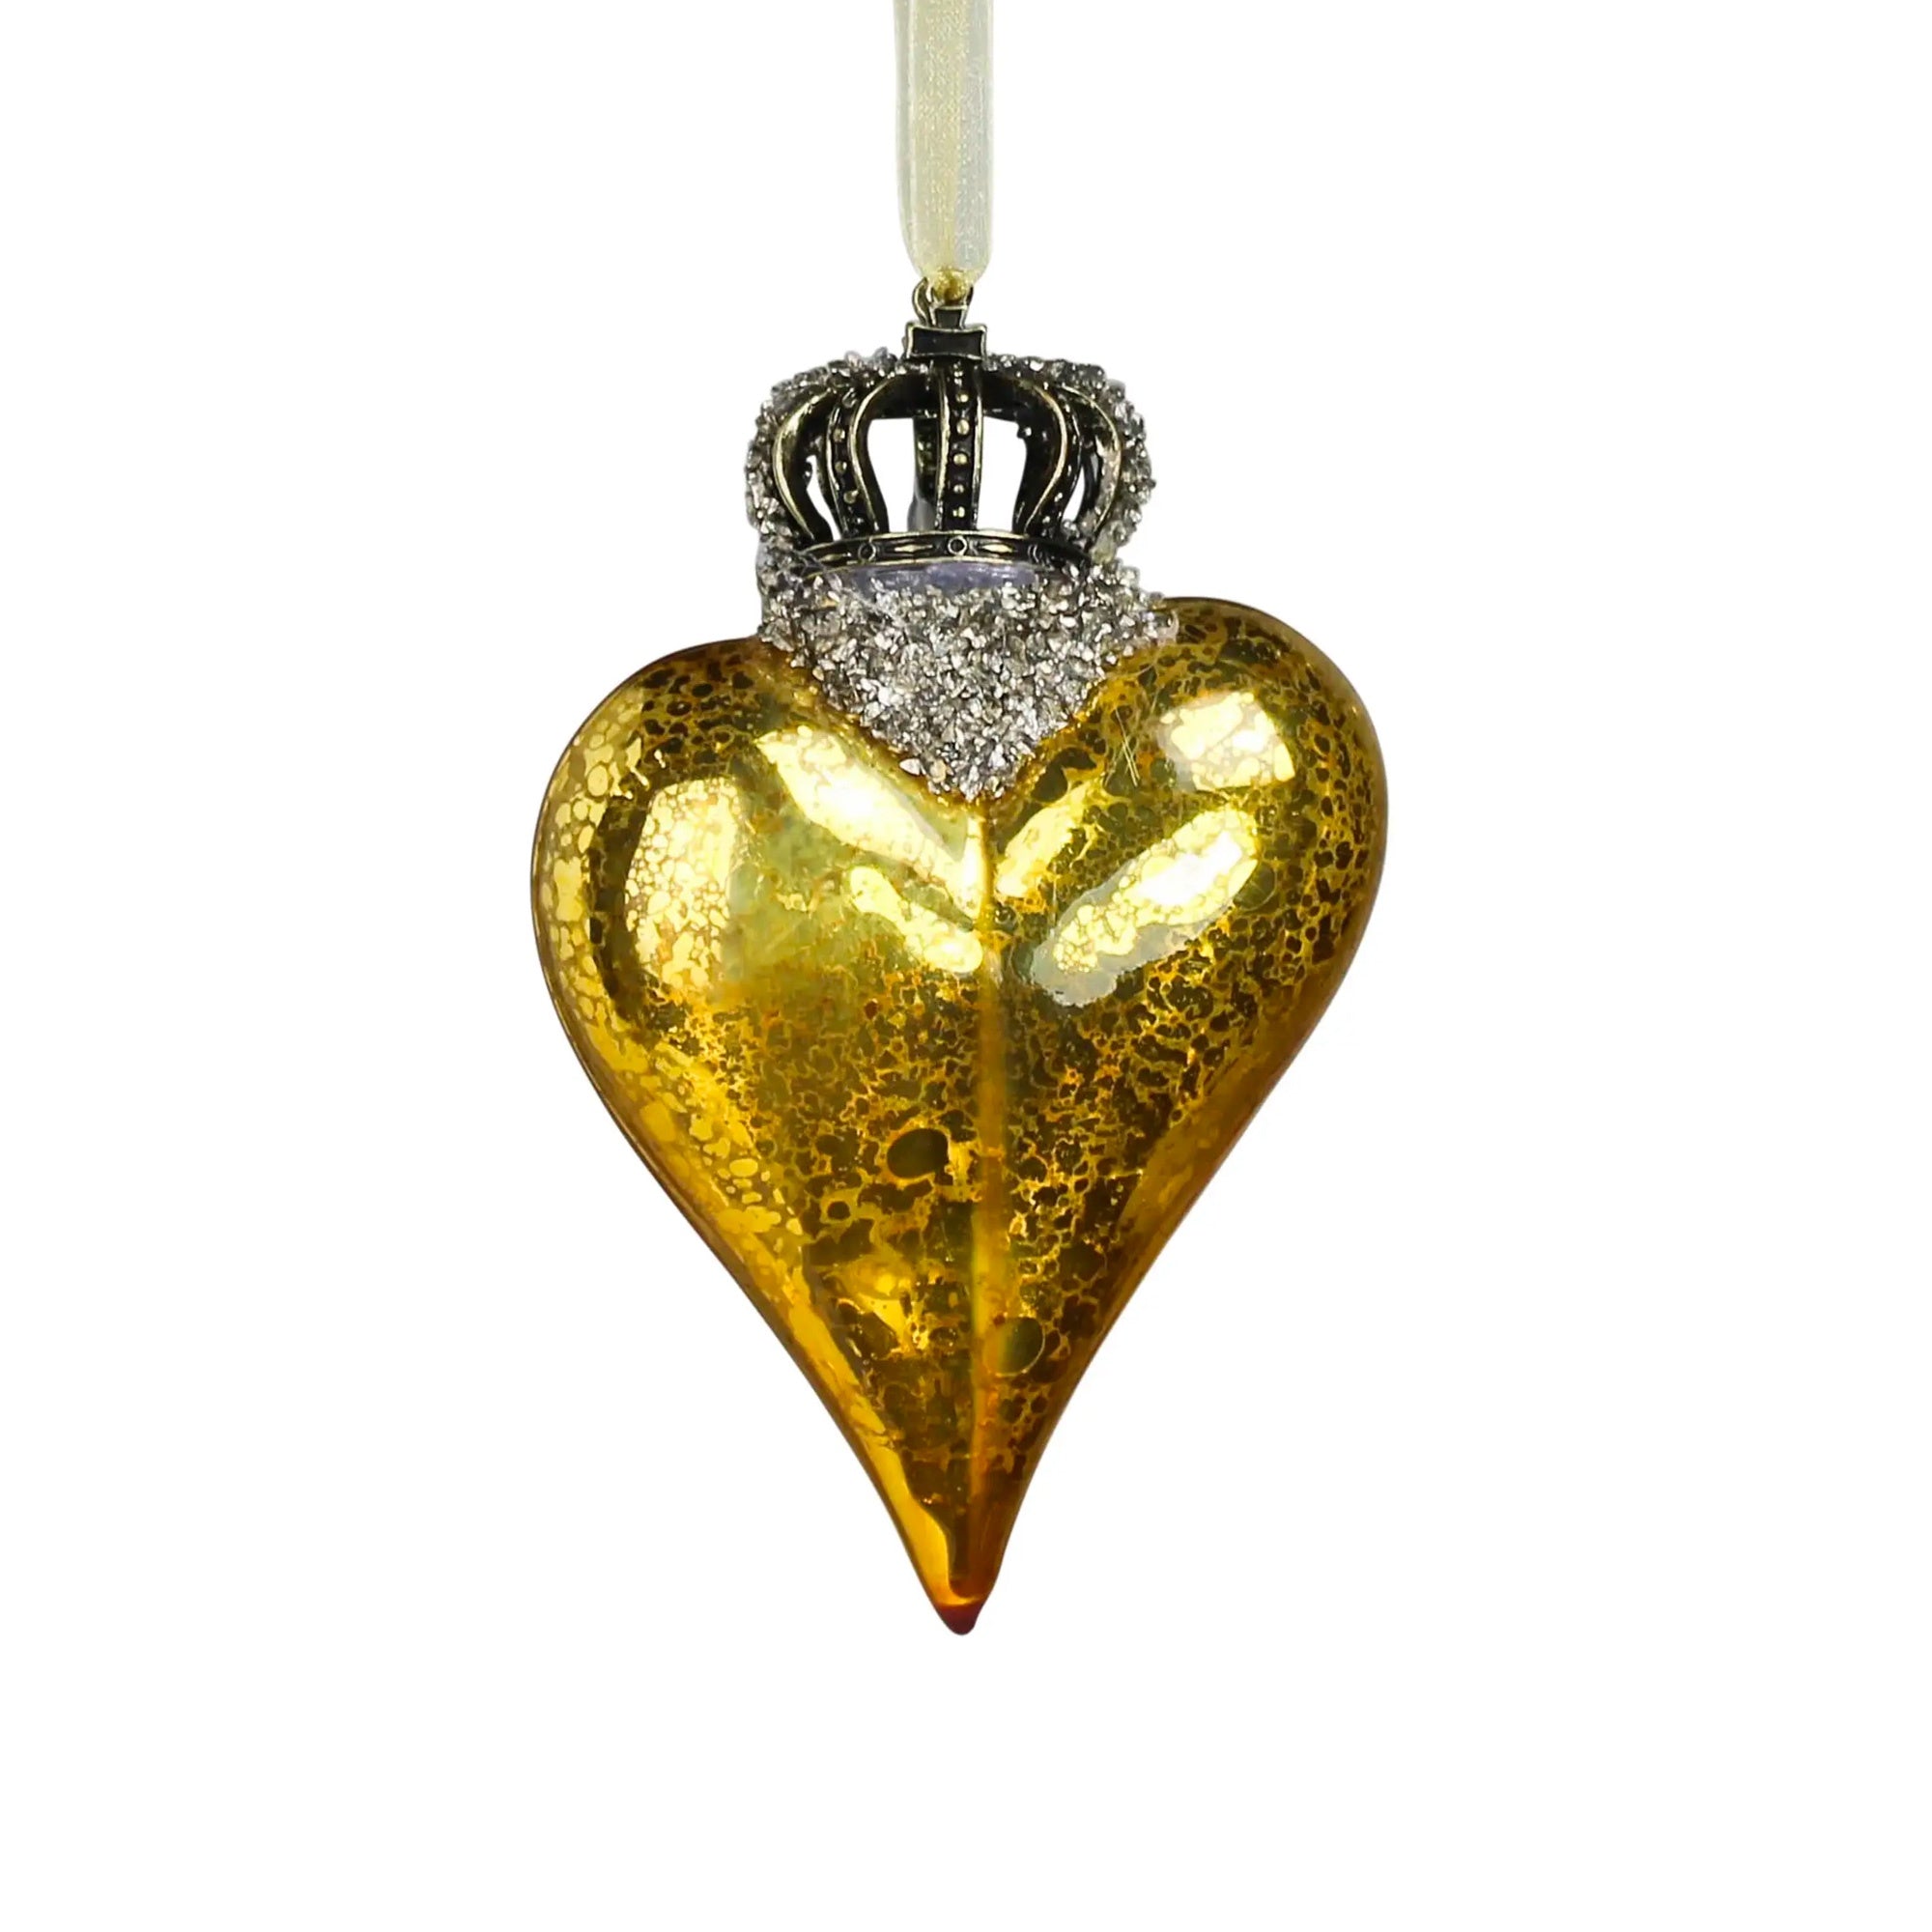 Gold Crowned Heart Ornament